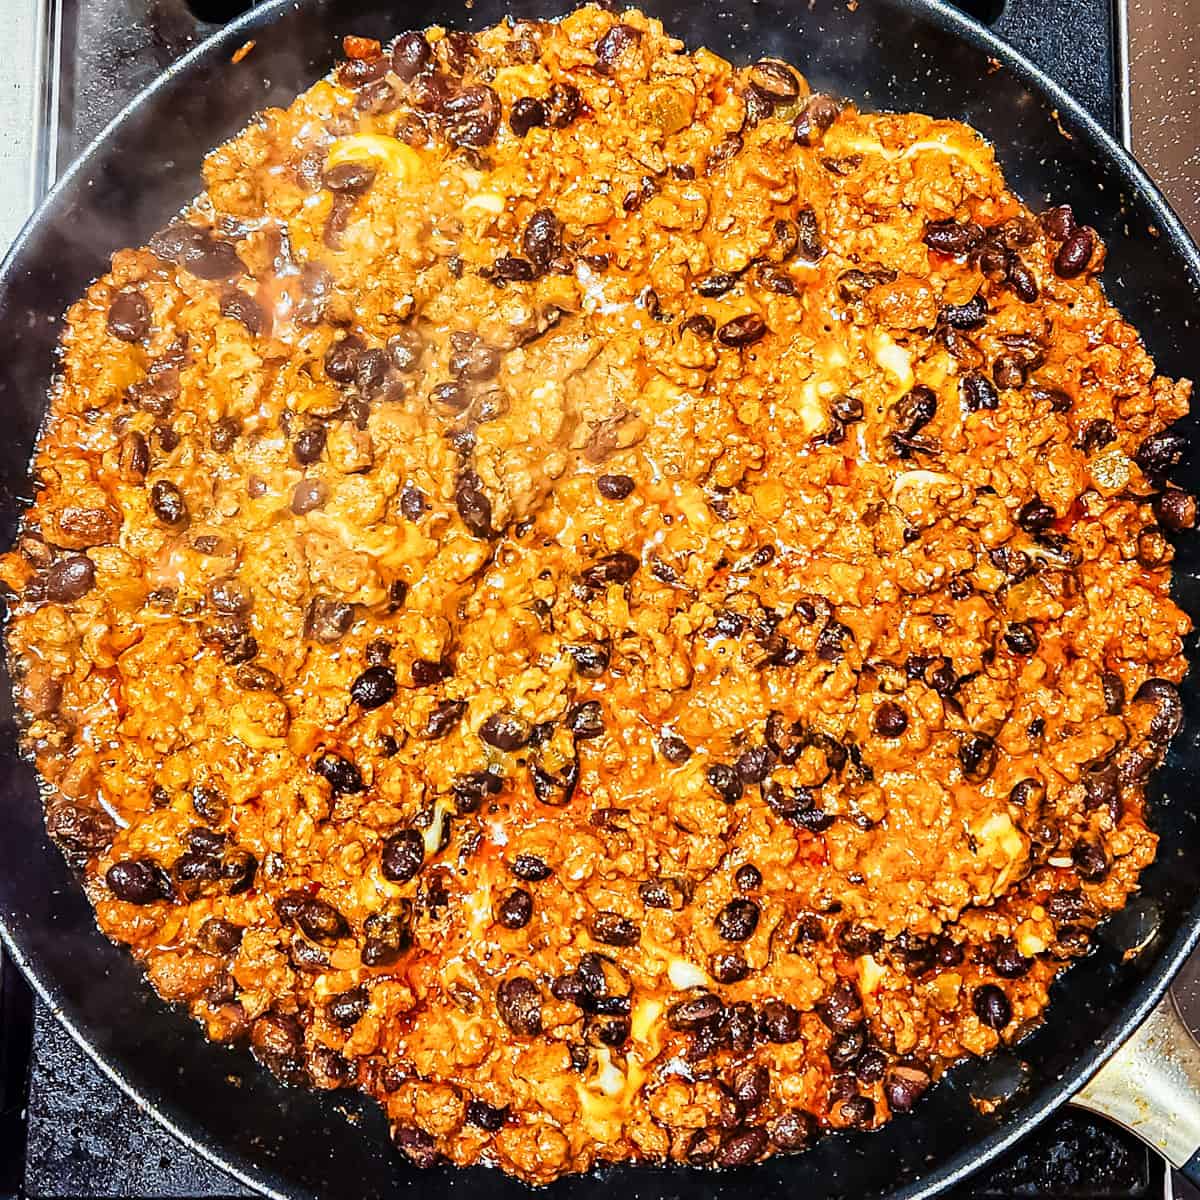 Beef enchilada filling in a pan.